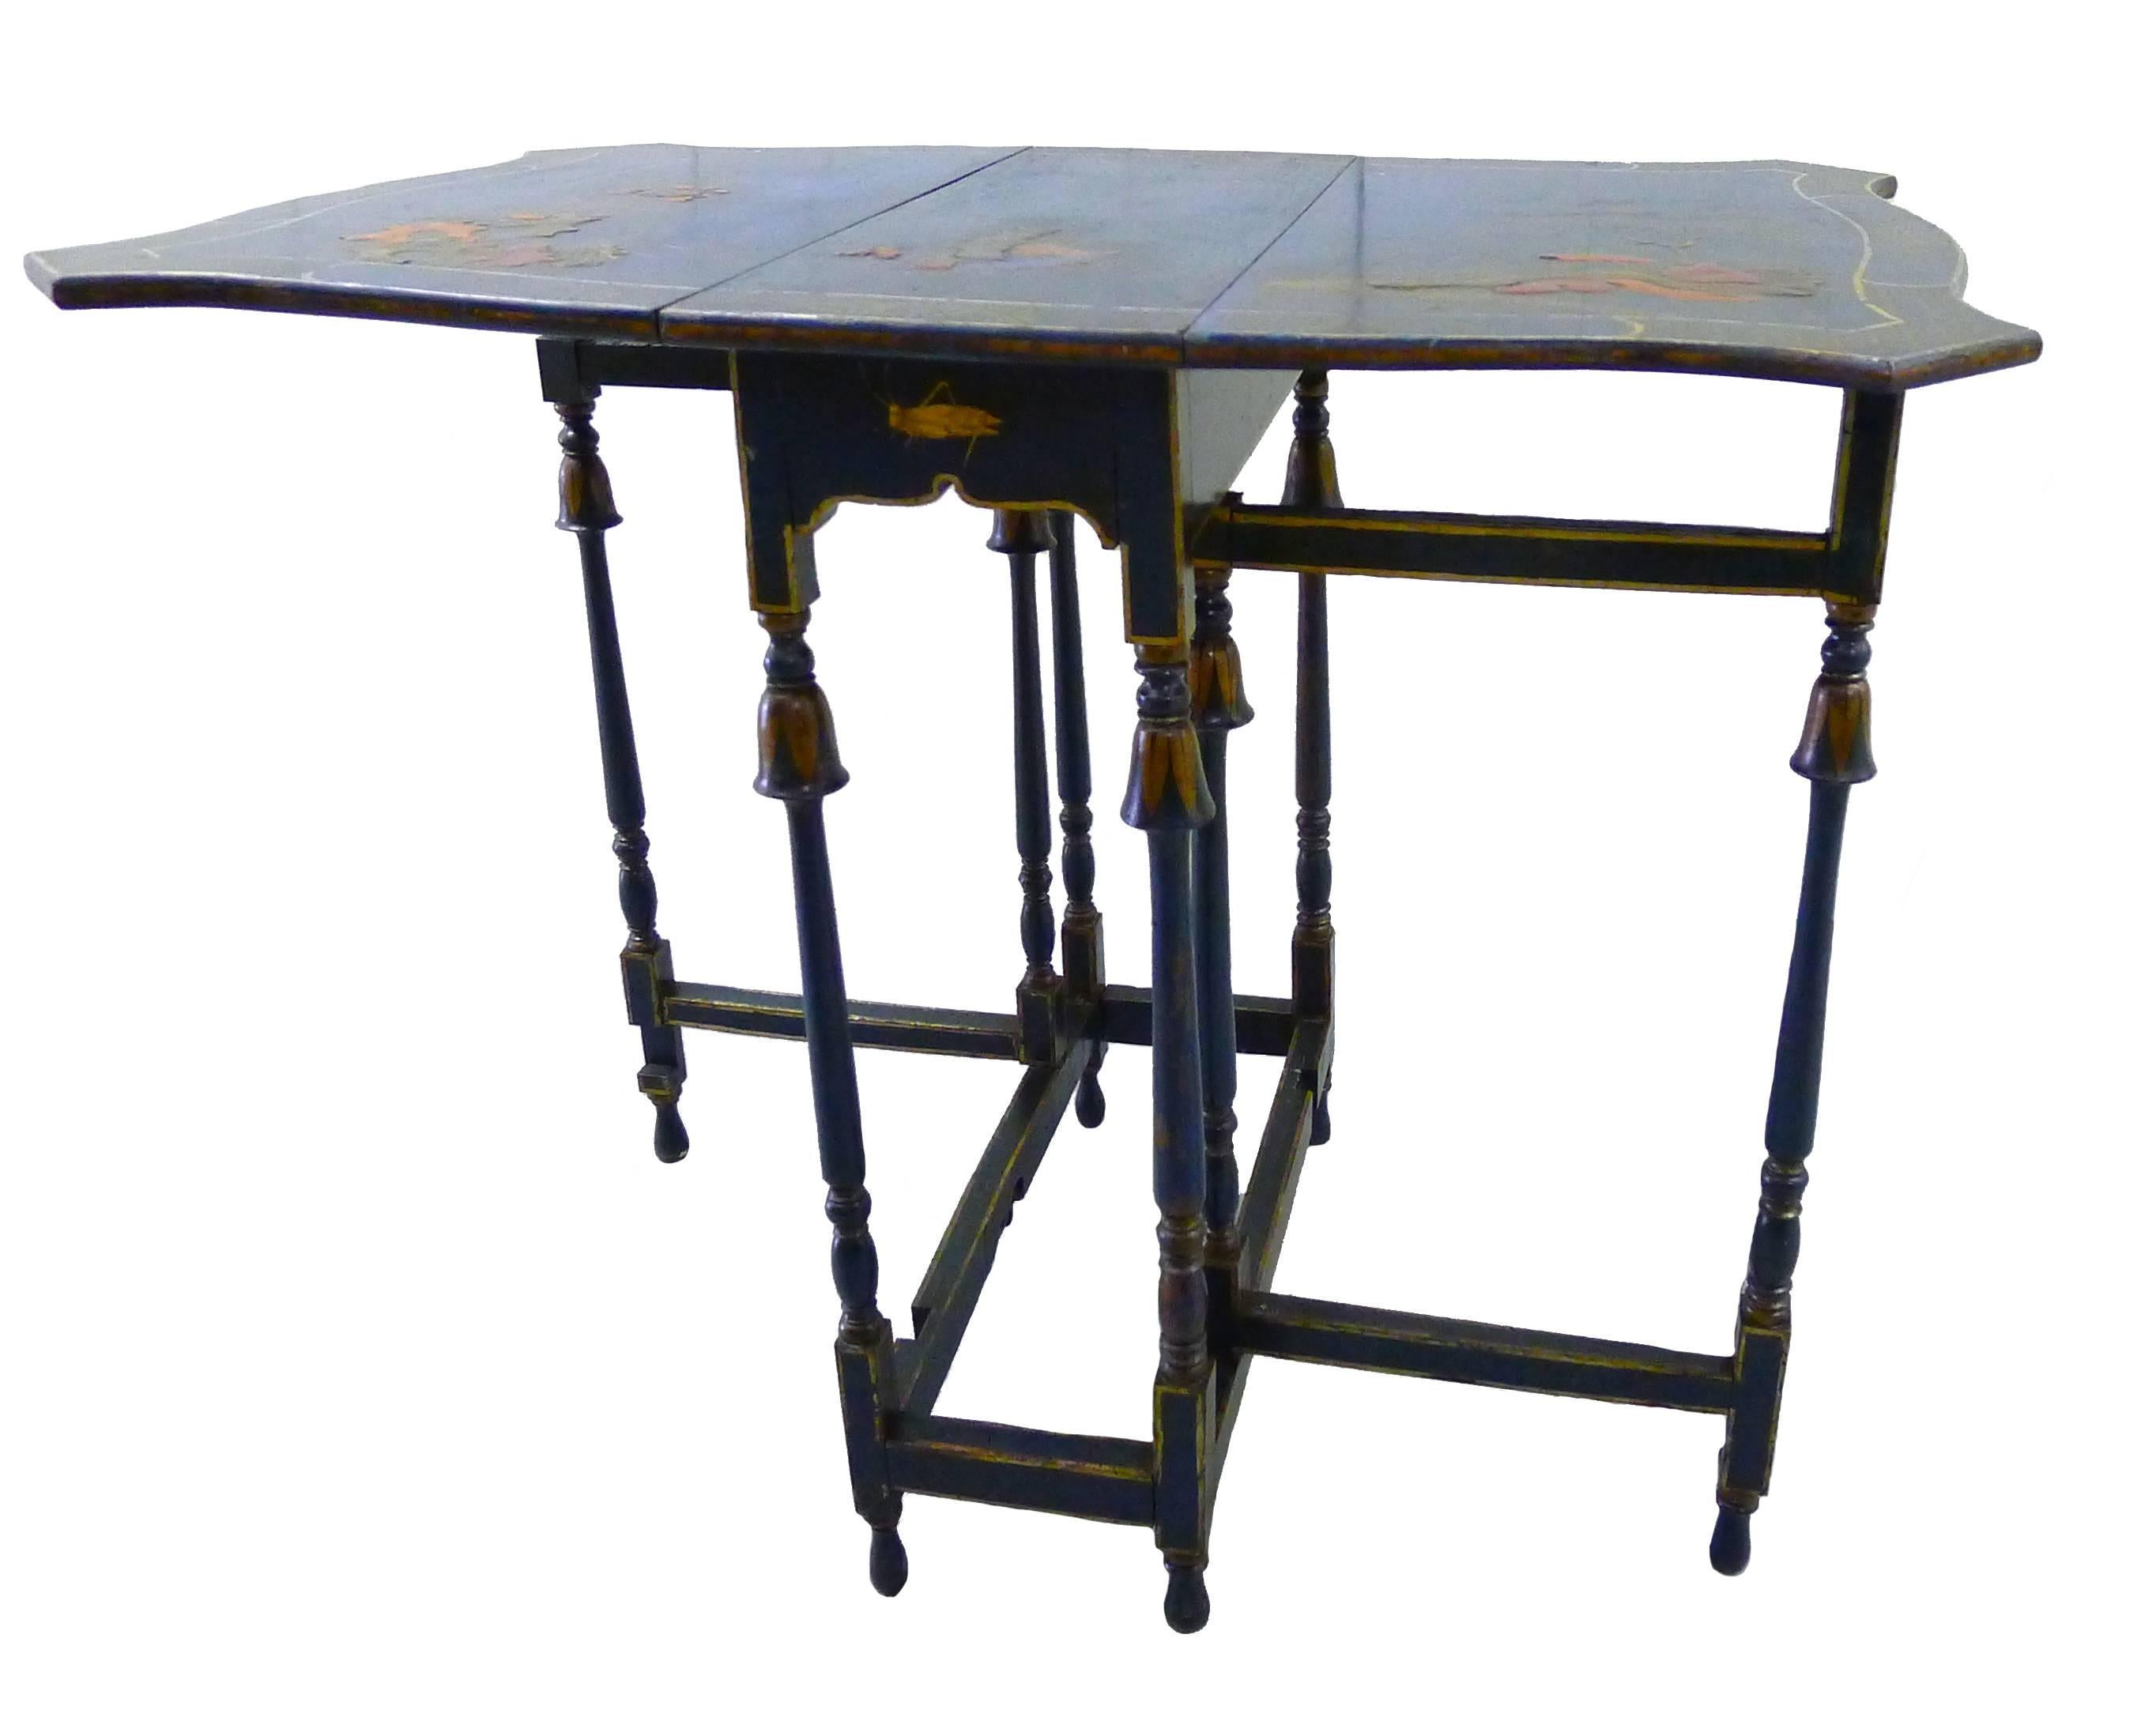 British Chinese Export-Style Chinoiserie Gate-Leg Drop Leaf Tea Table For Sale